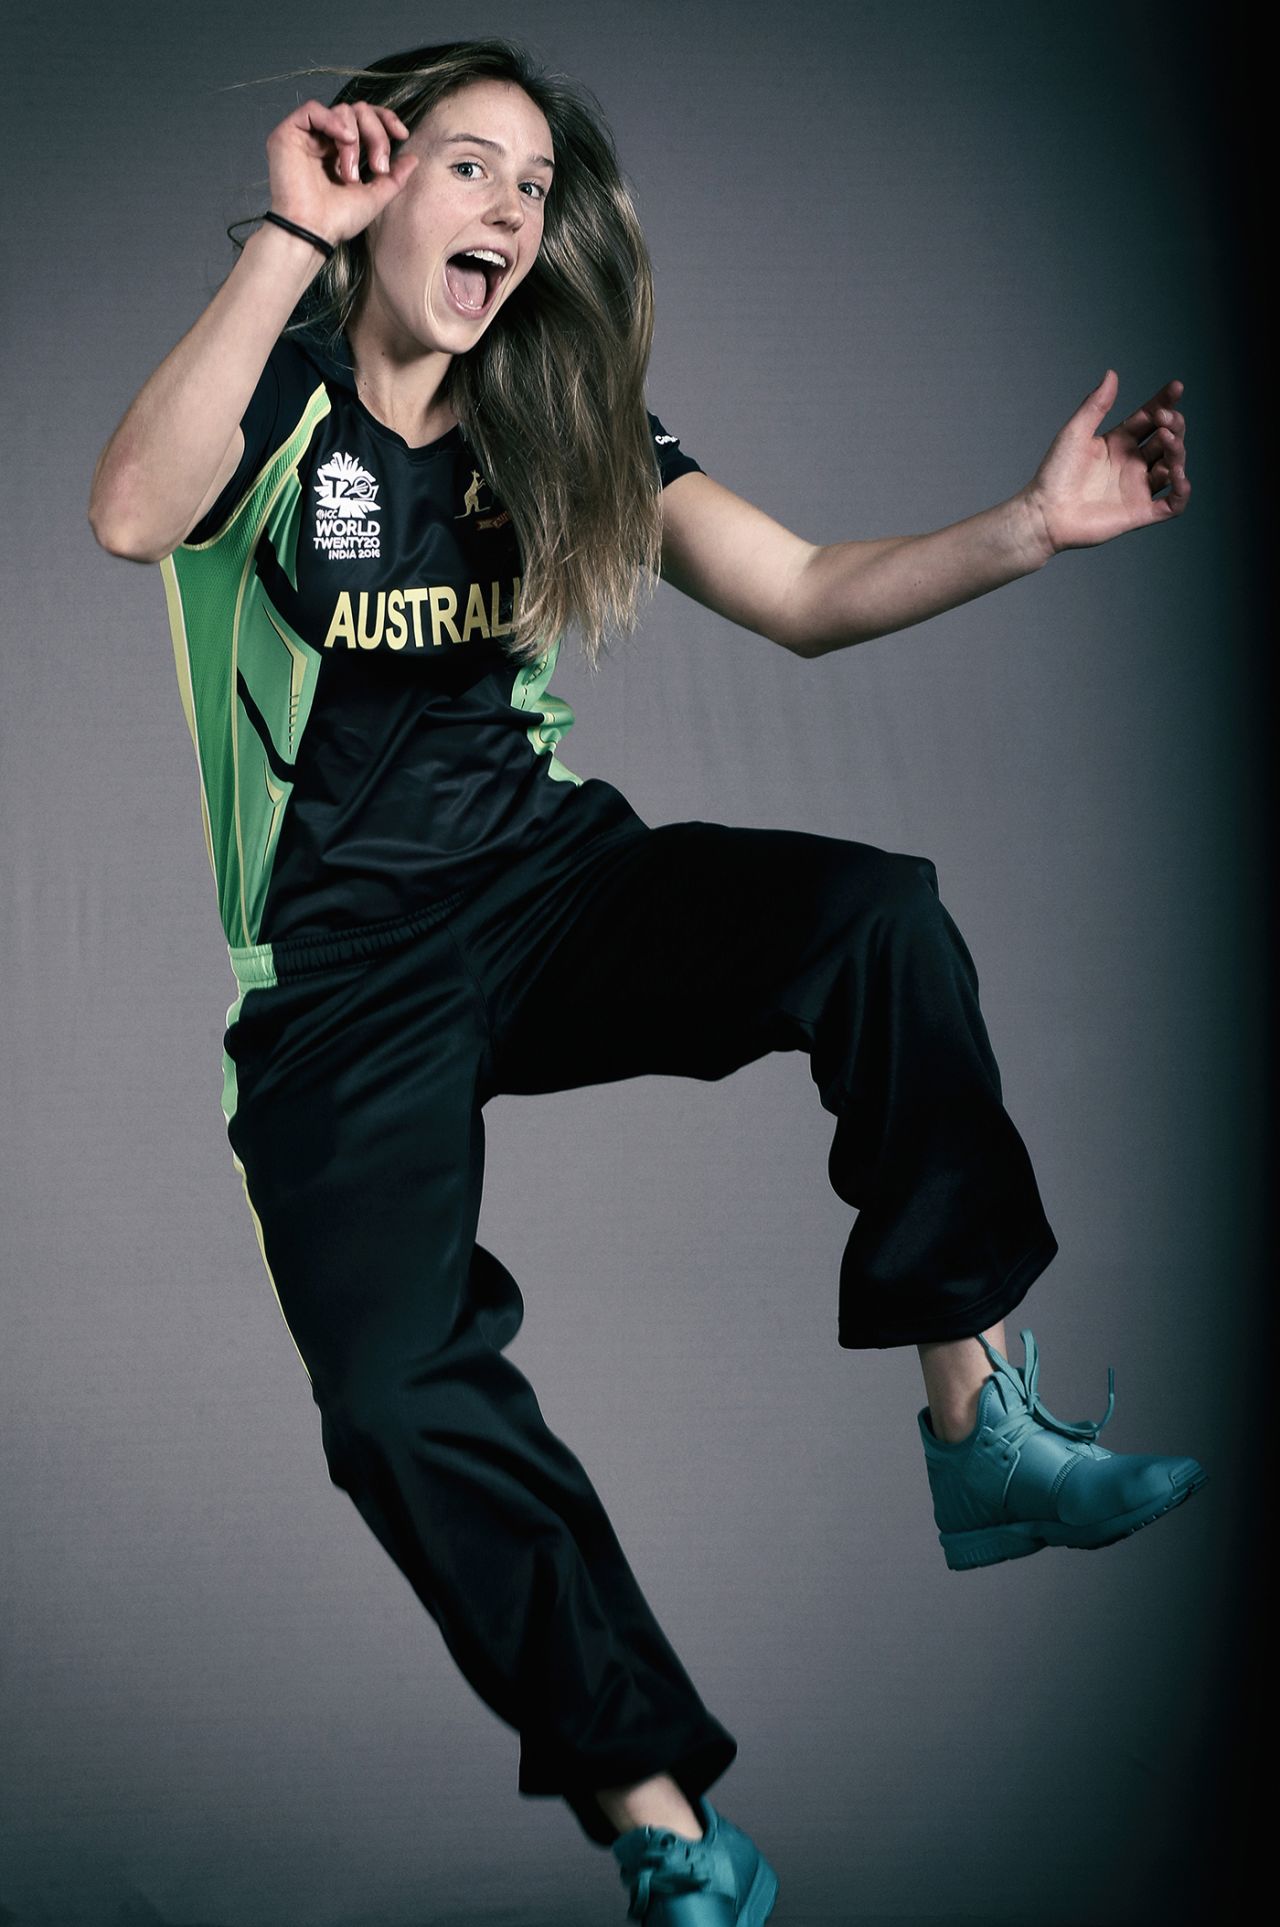 Ellyse Perry goofs around during a photo shoot, Chennai, March 11, 2016